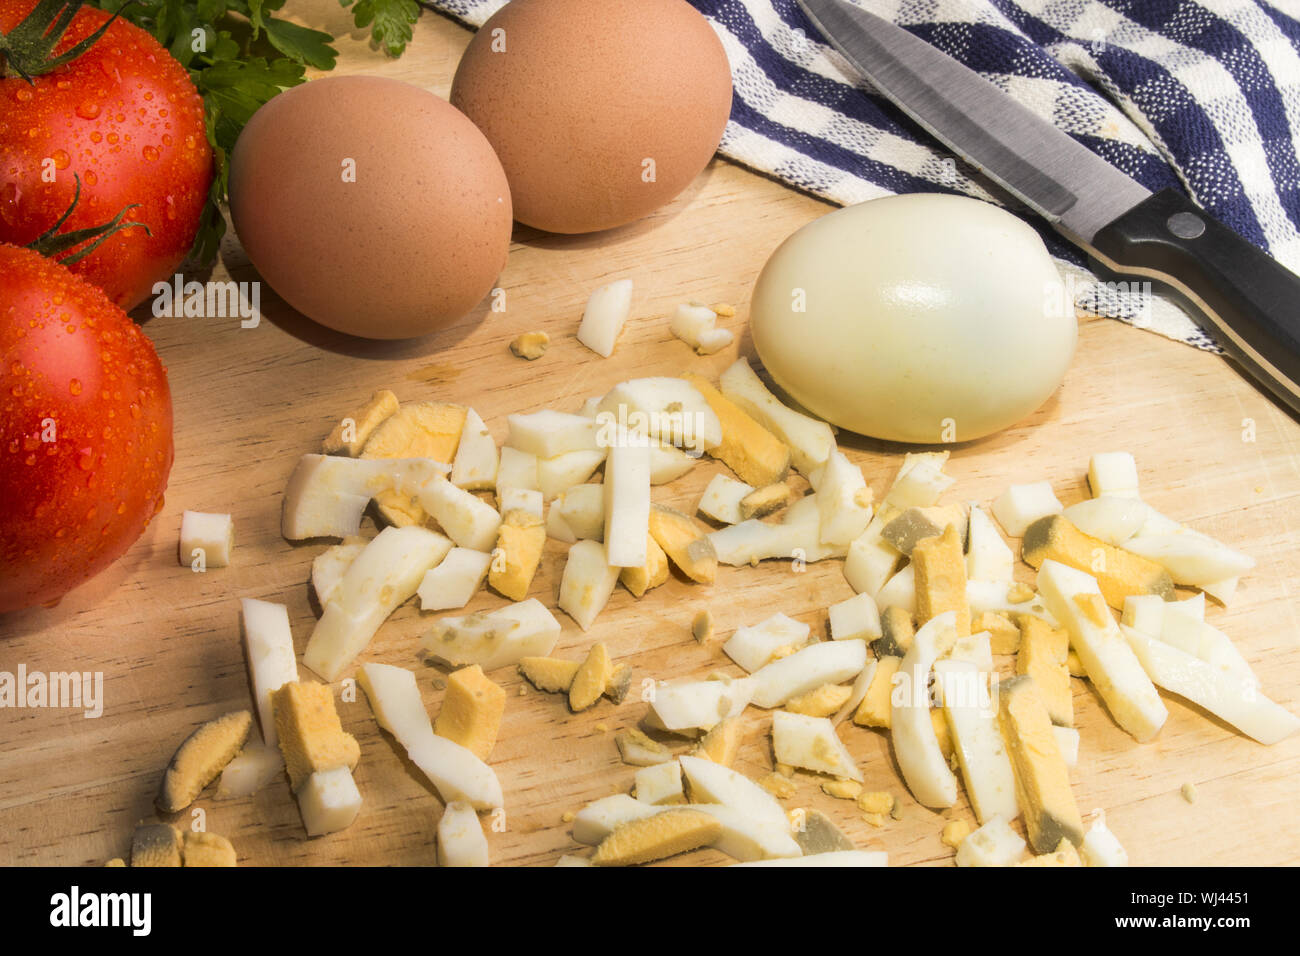 wet tomatoes, diced boiled eggs on a wooden board Stock Photo